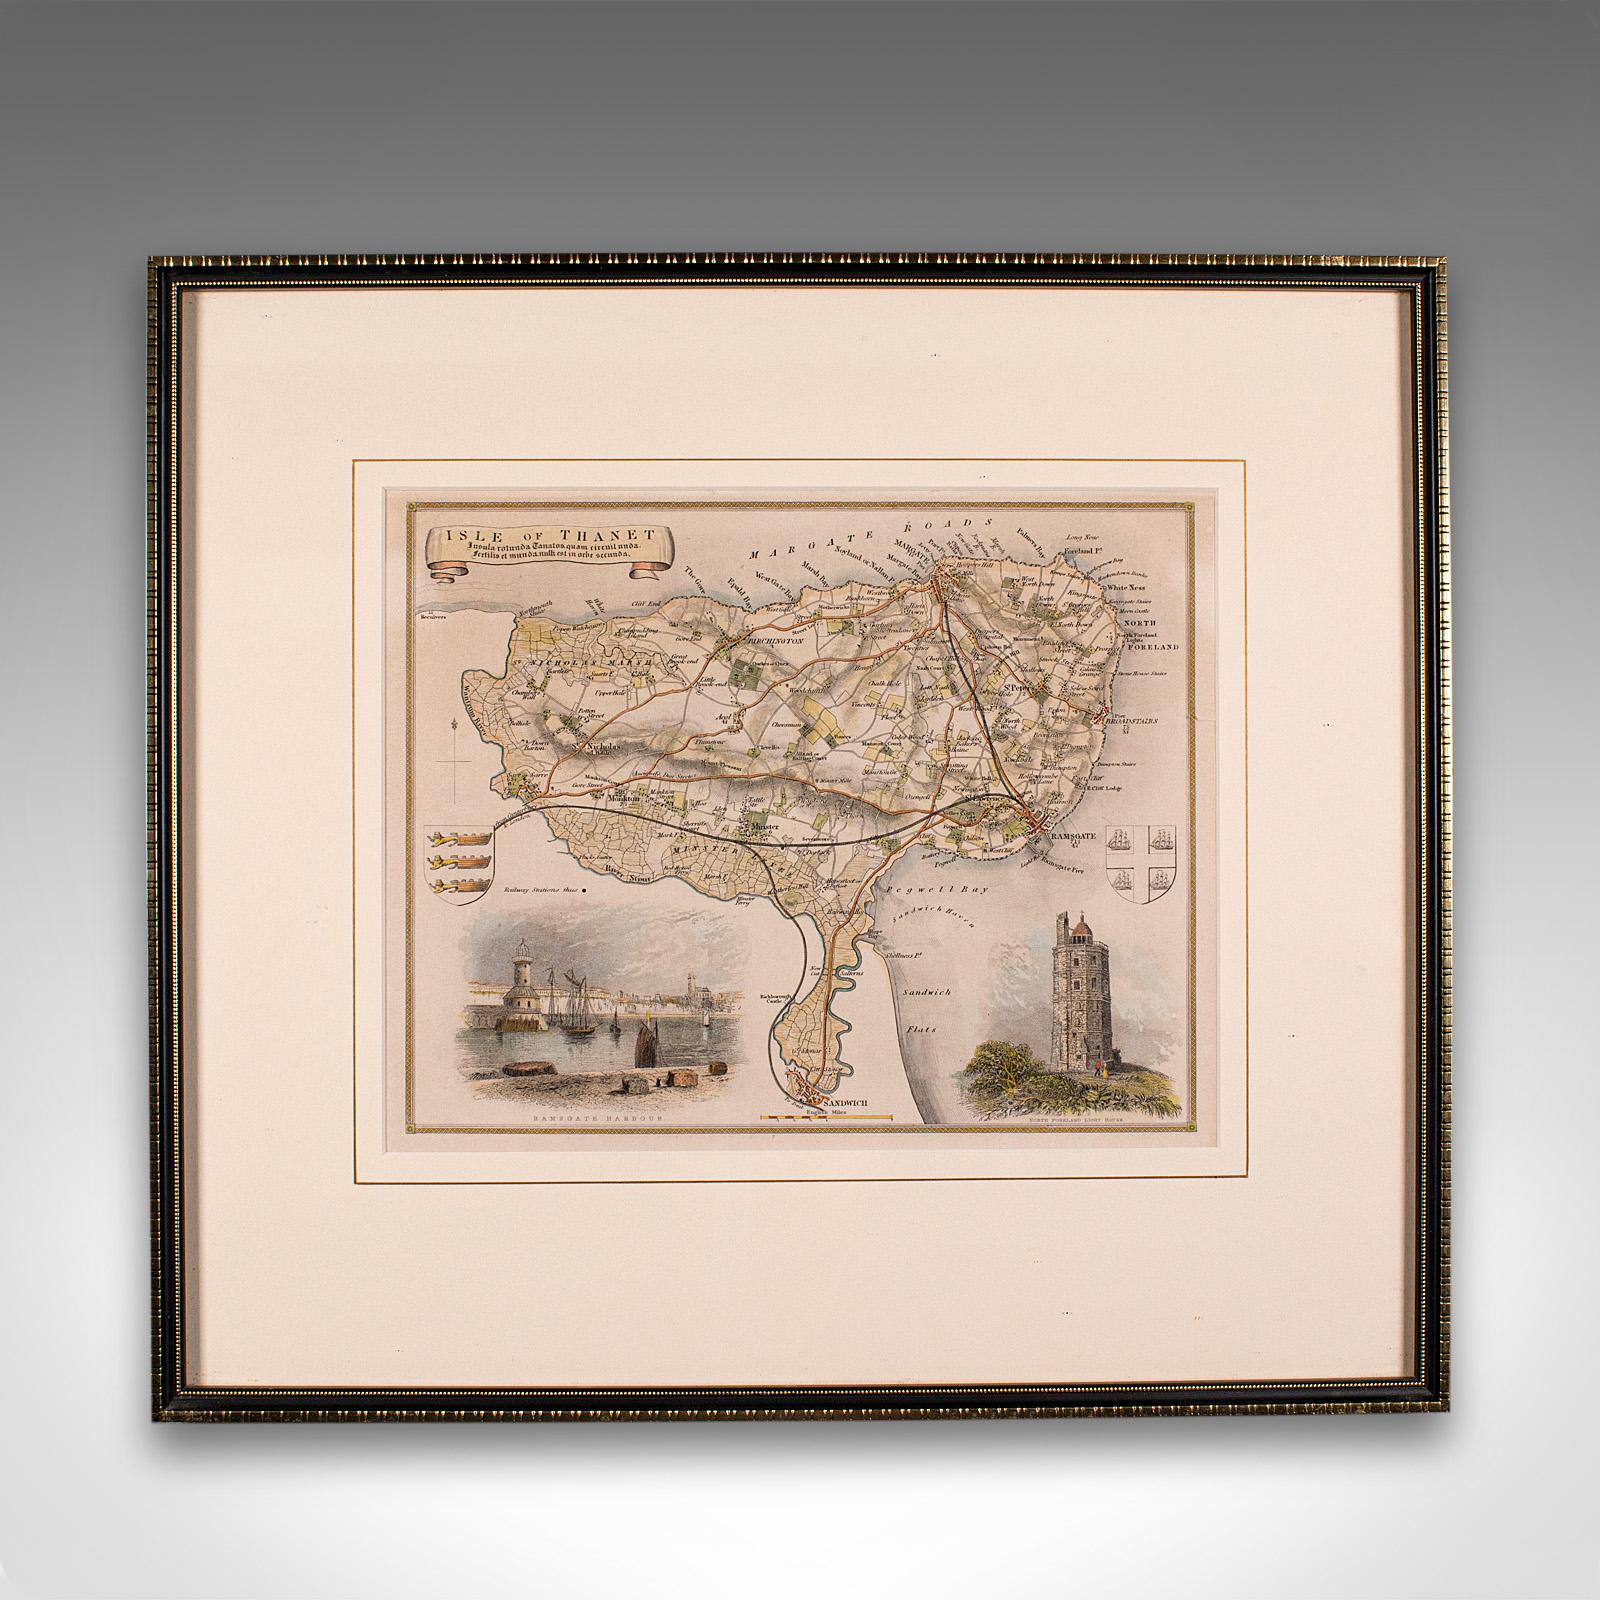 This is an antique lithography map of The Isle of Thanet in Kent. An English, framed atlas engraving of cartographic interest, dating to the mid 19th century and later.

Superb lithography of the region comprising the easternmost part of